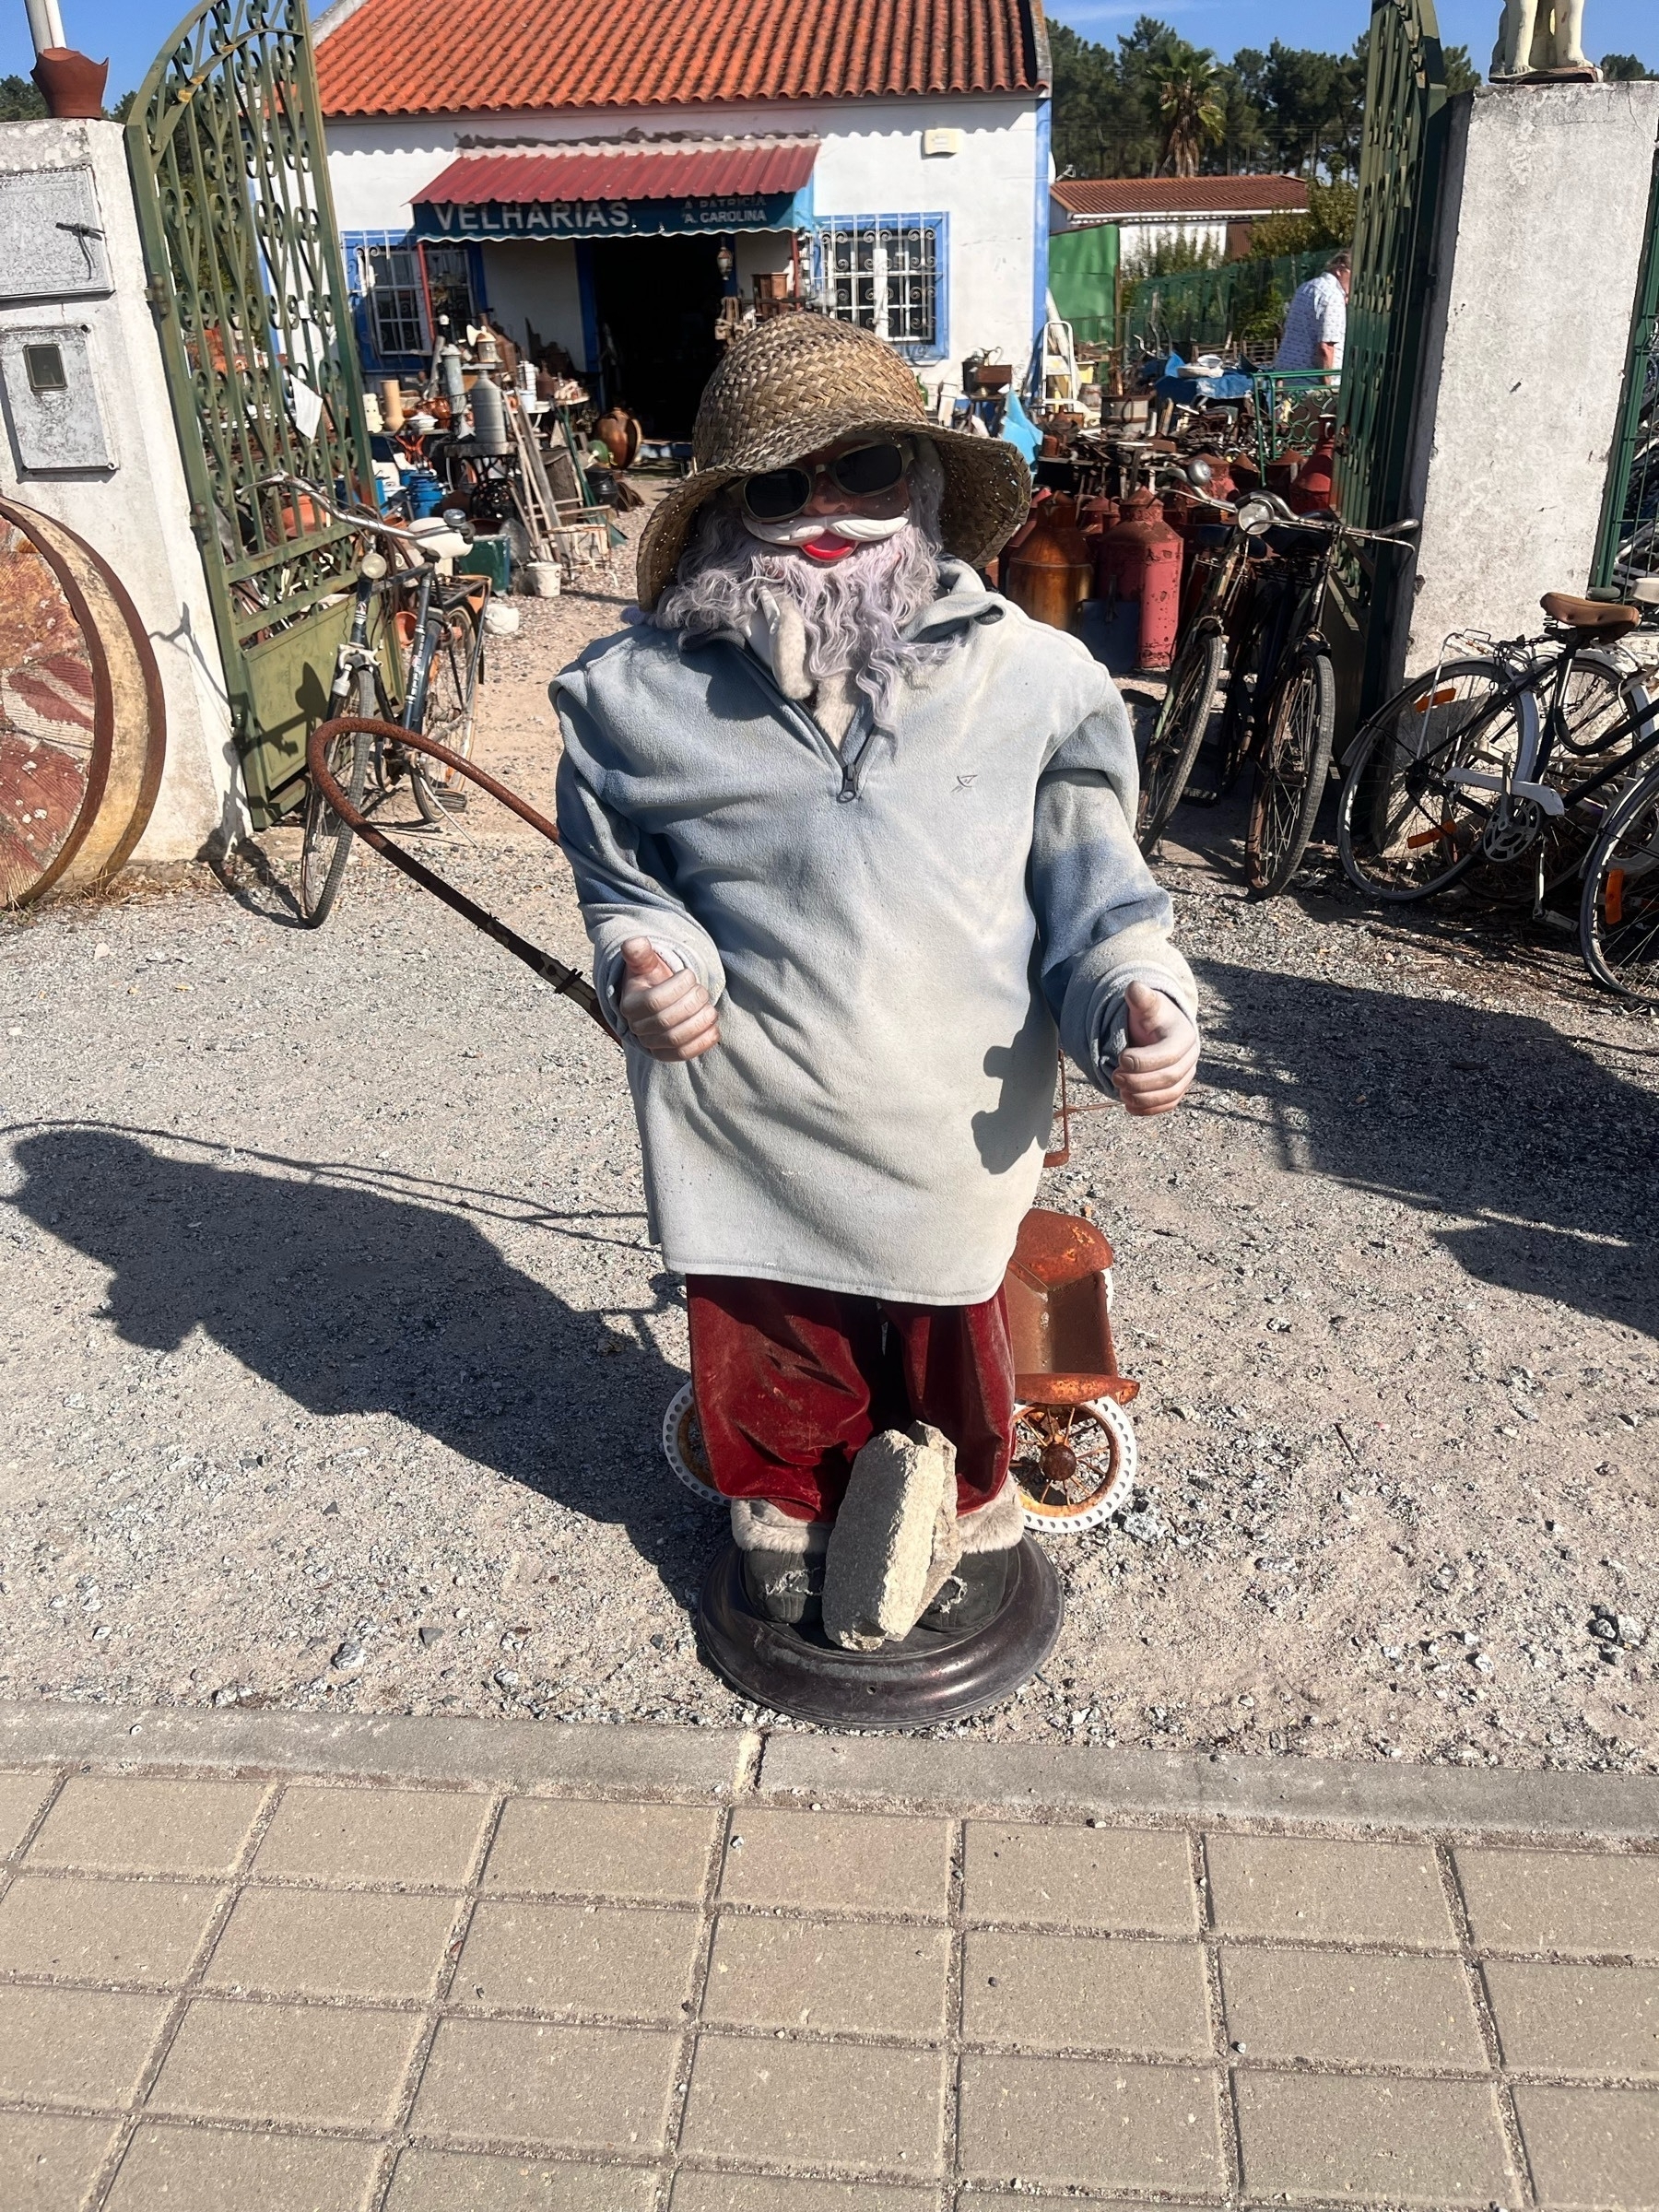 A mannequin of a fisherman, over dressed for the very hot weather